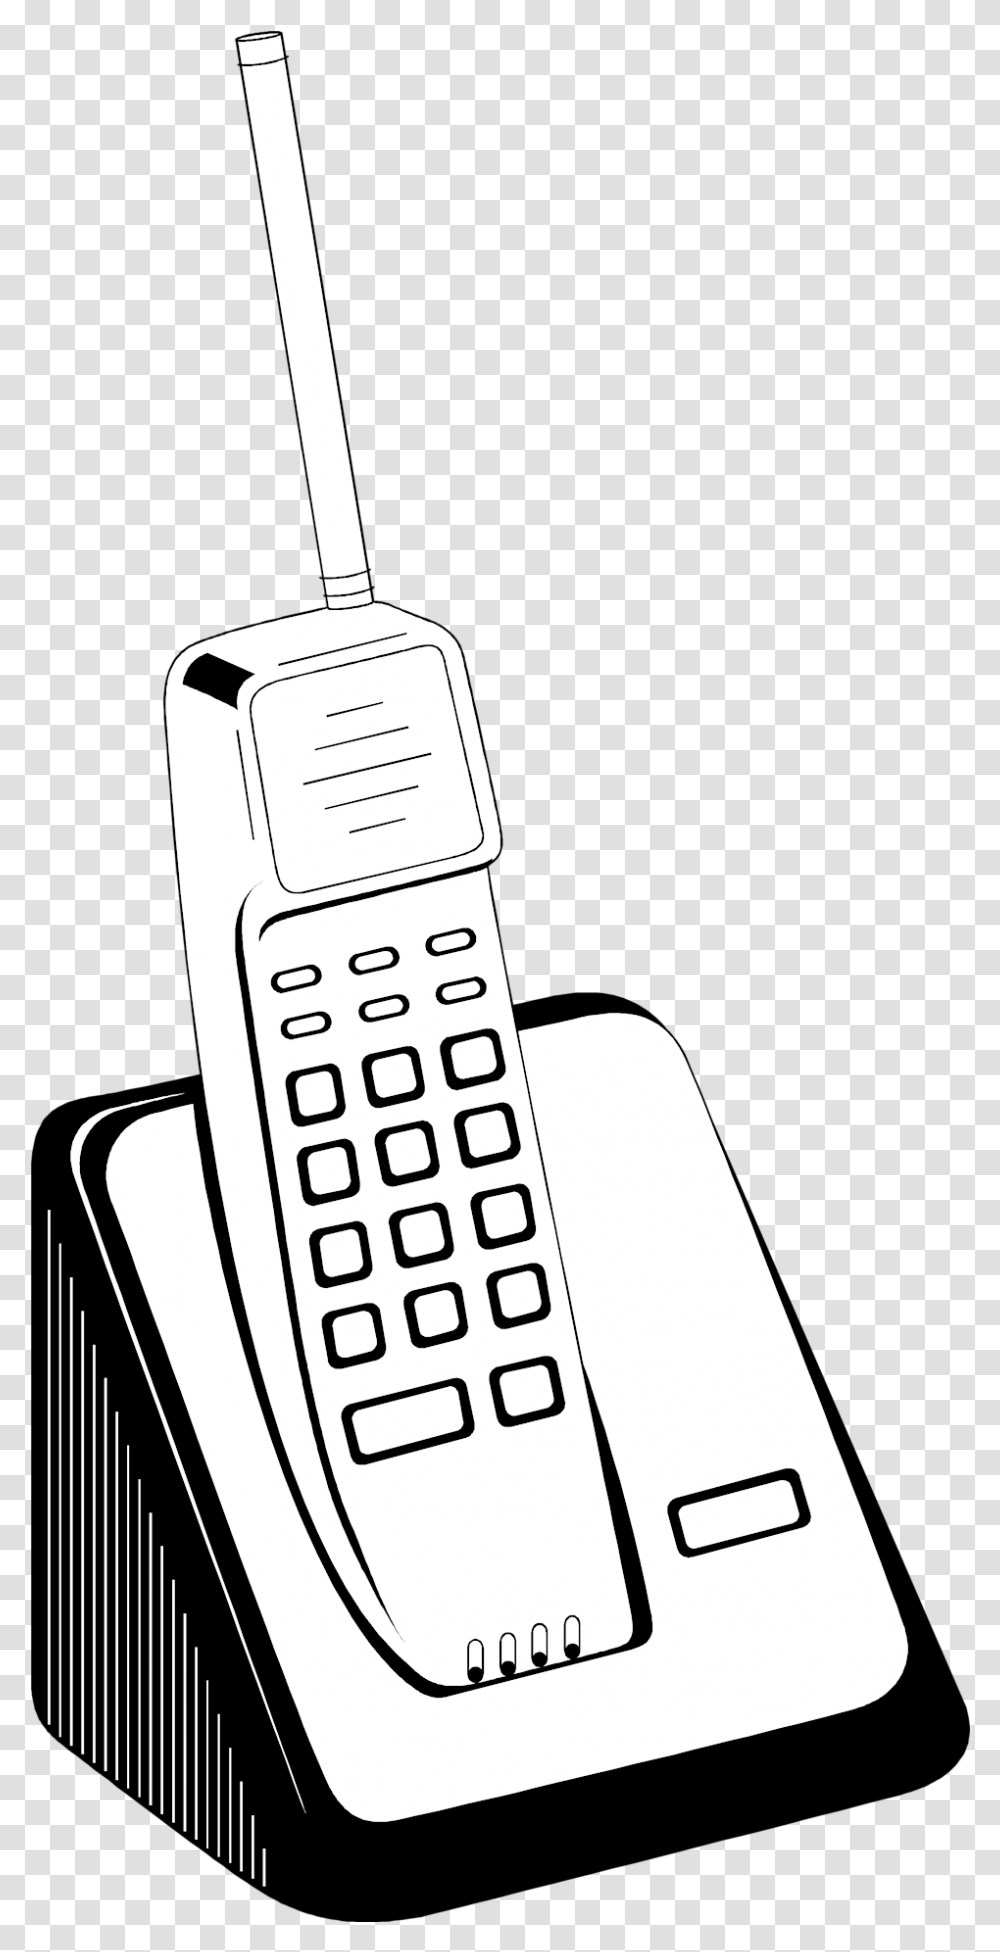 Telephone Clipart House Phone Cordless Phone Clip Art Cordless Phone Clip Art, Electronics, Mobile Phone, Cell Phone Transparent Png